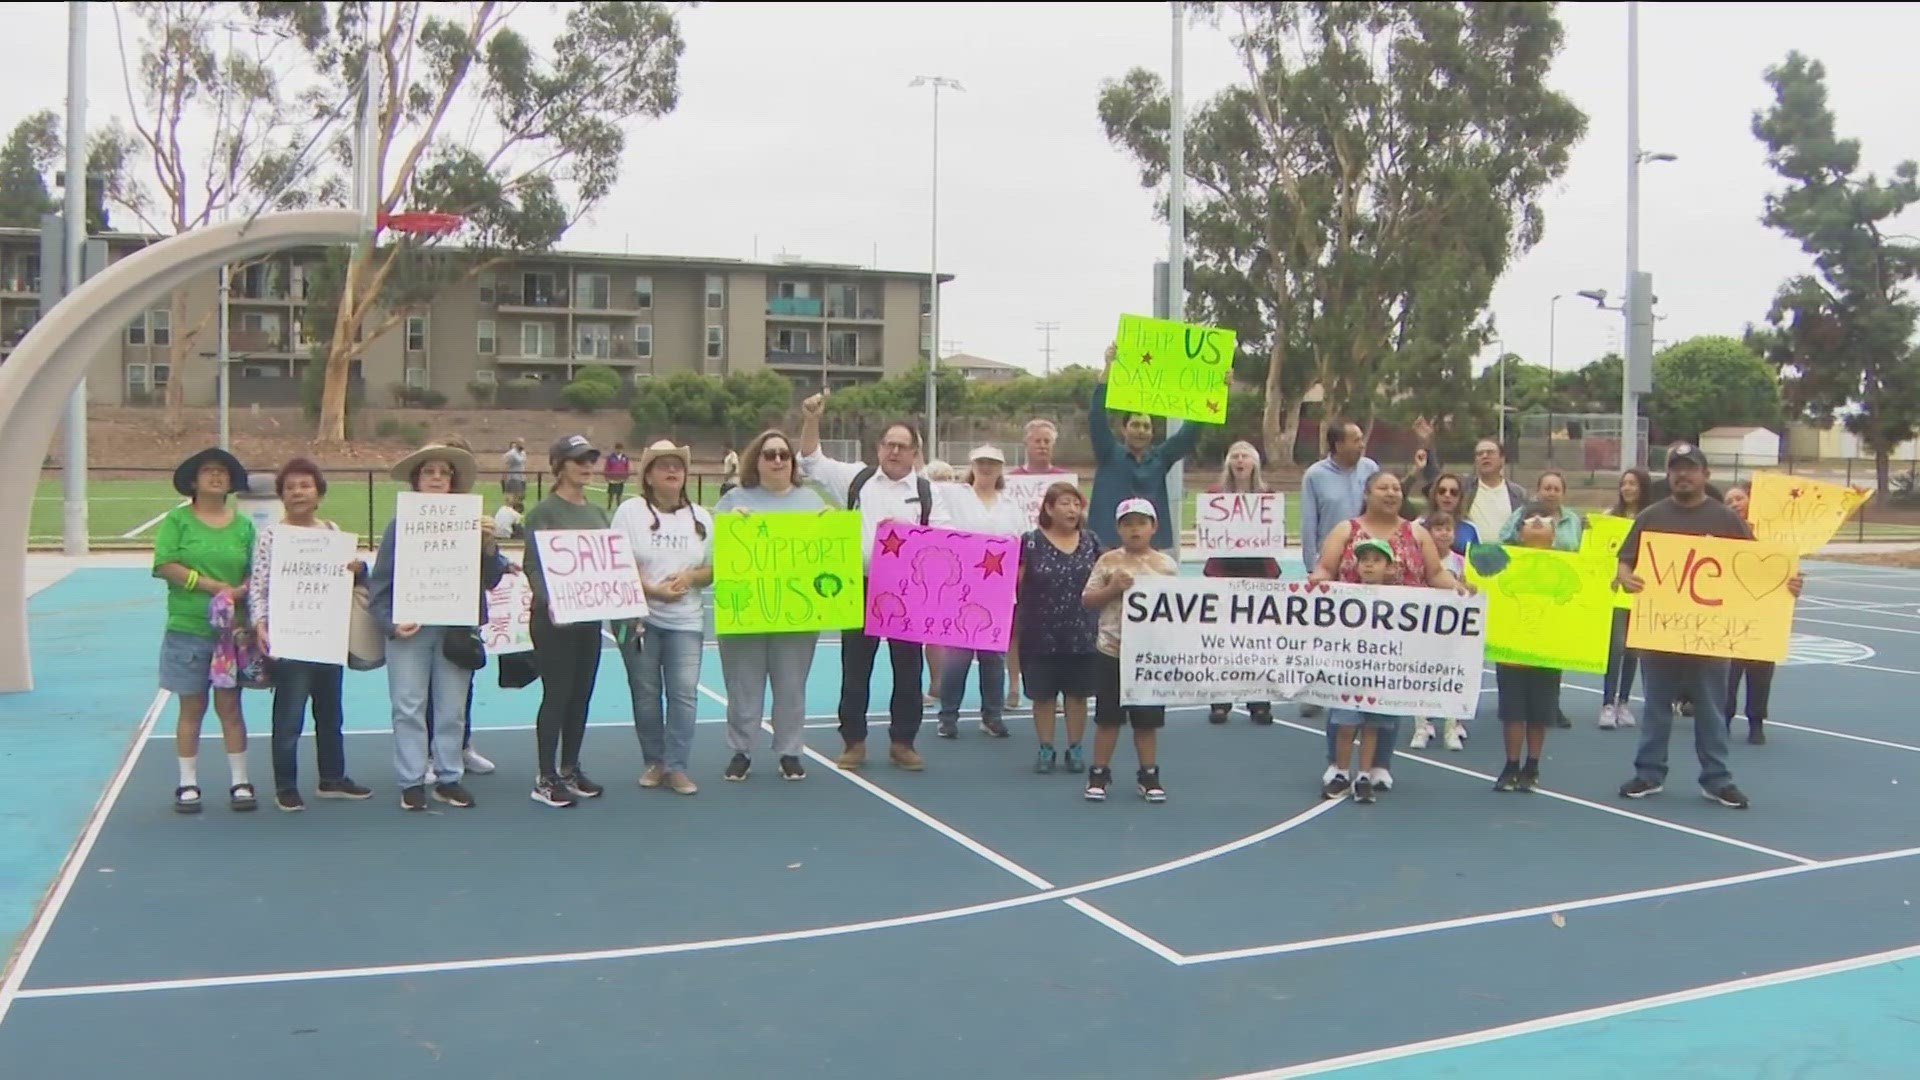 Residents are concerned over possible plans to build housing at the park.